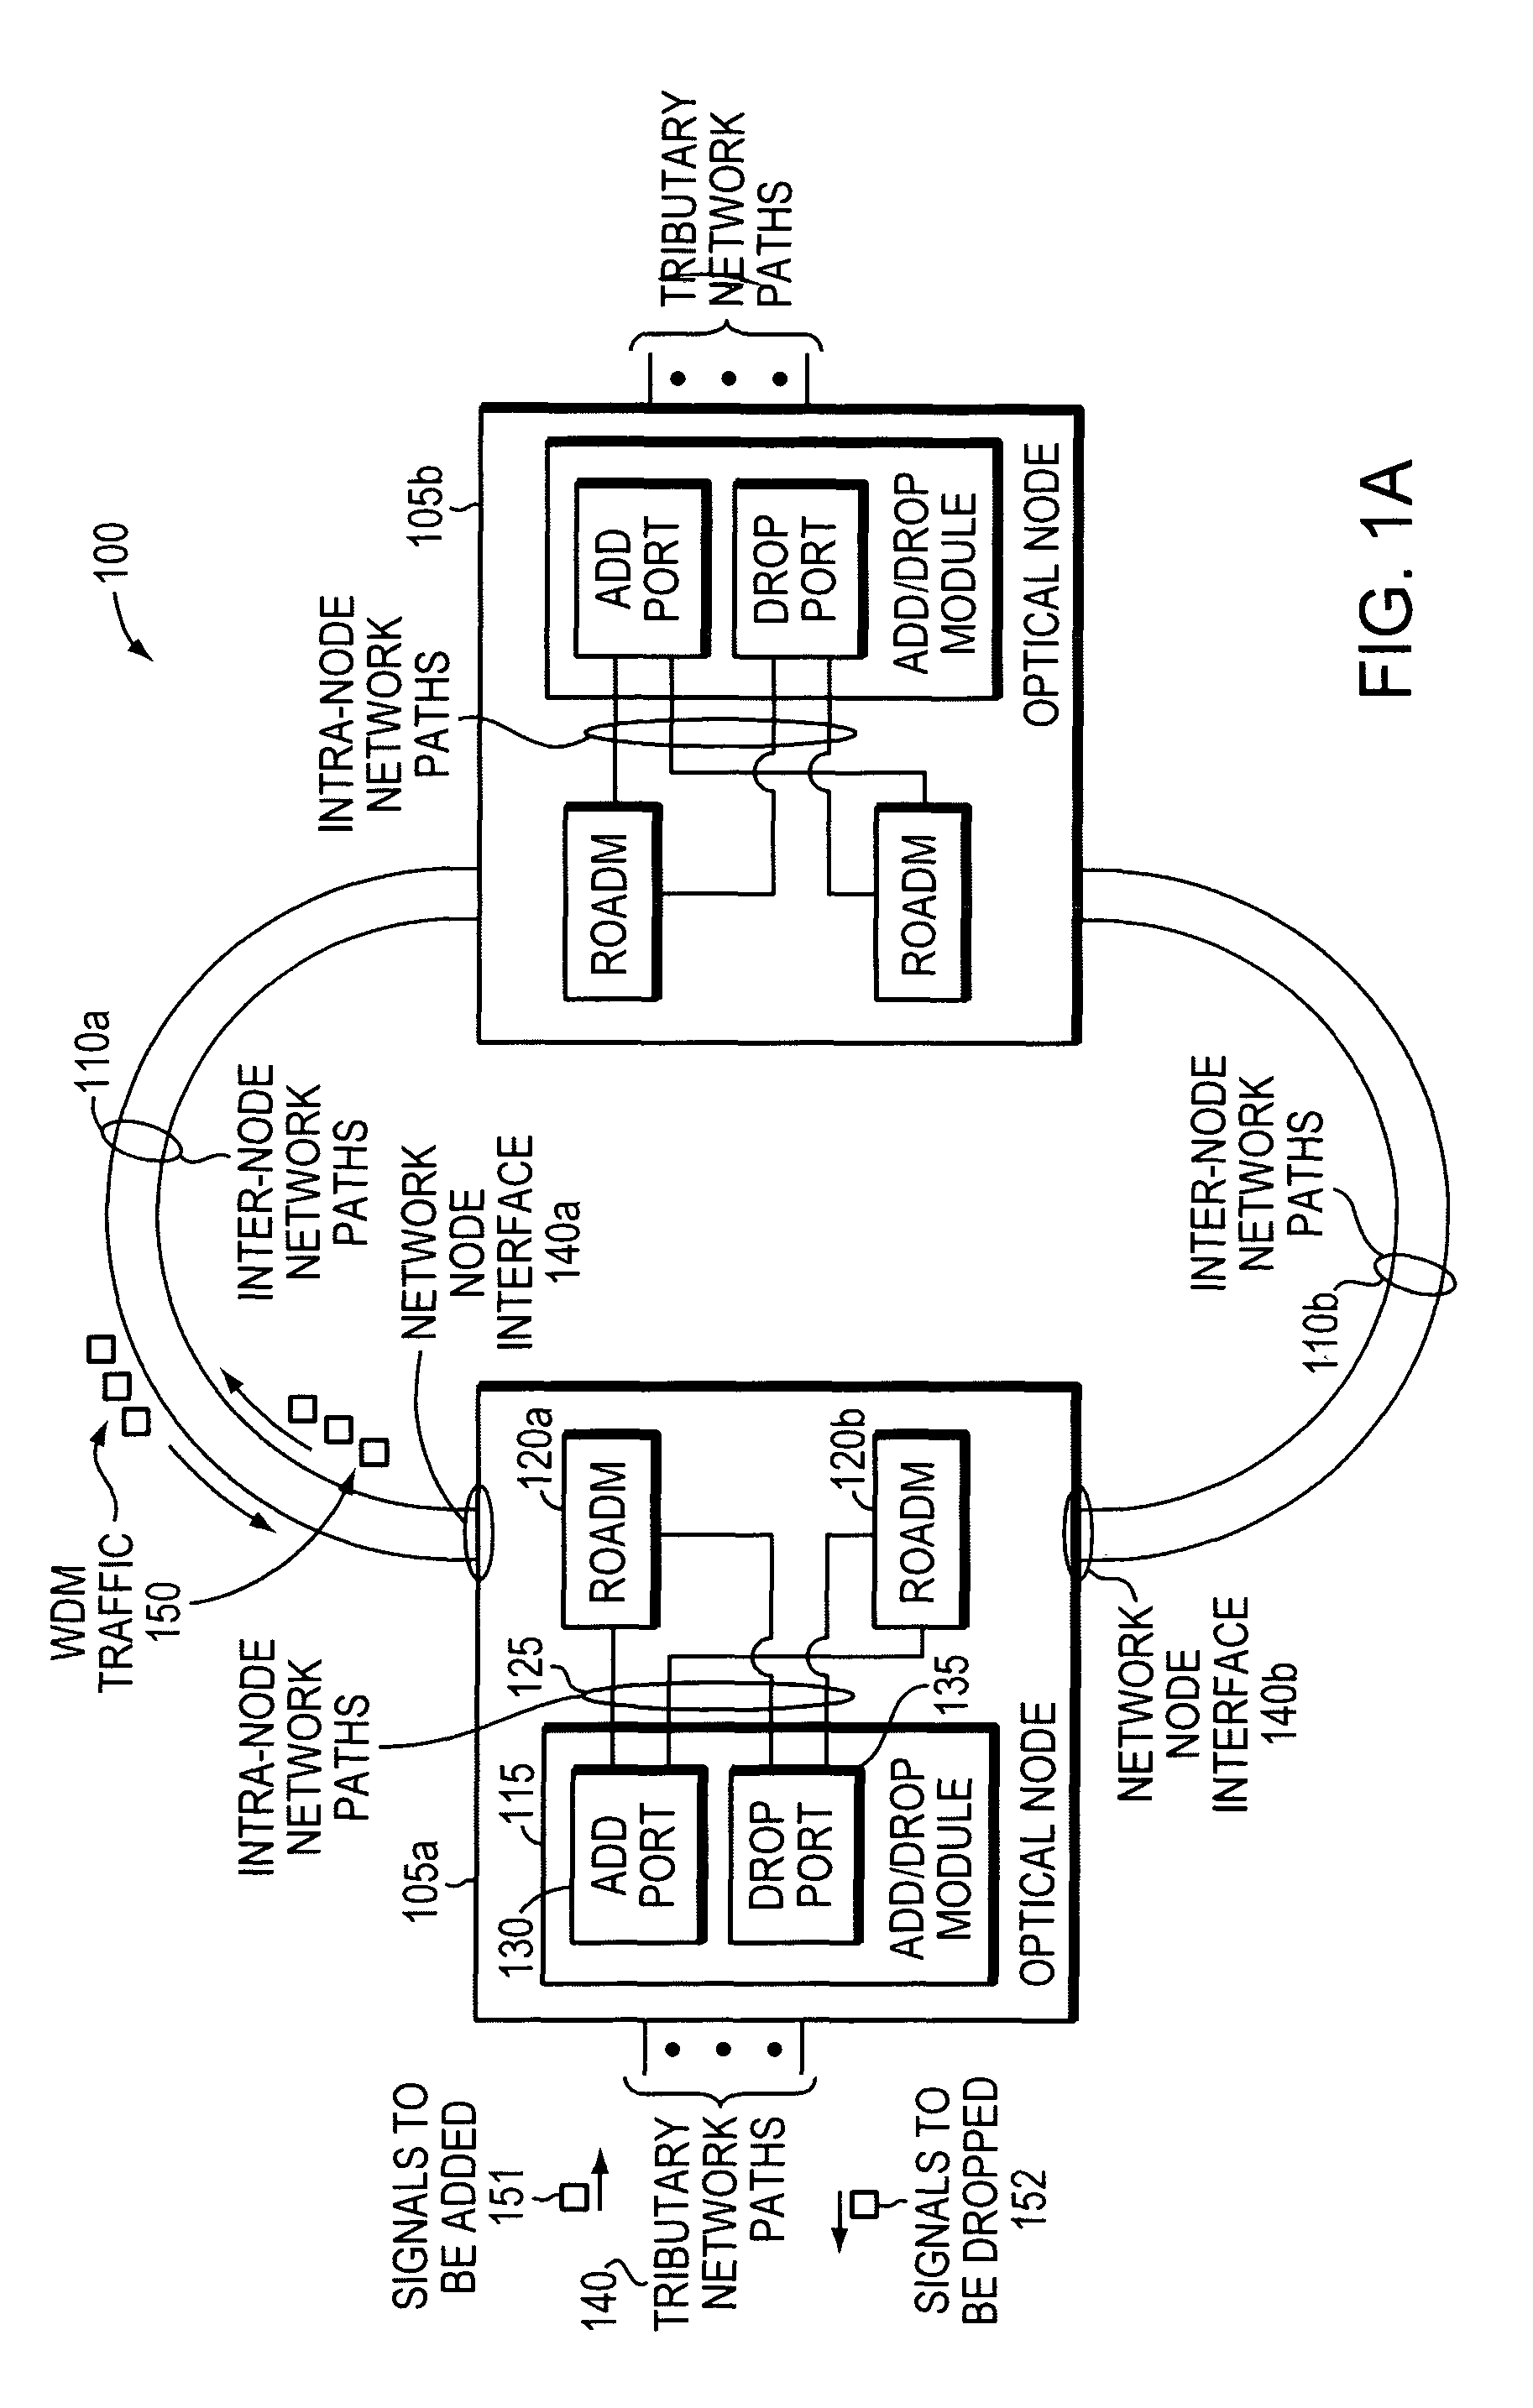 Methods and apparatus for performing directionless wavelength addition and subtraction within a ROADM based optical node